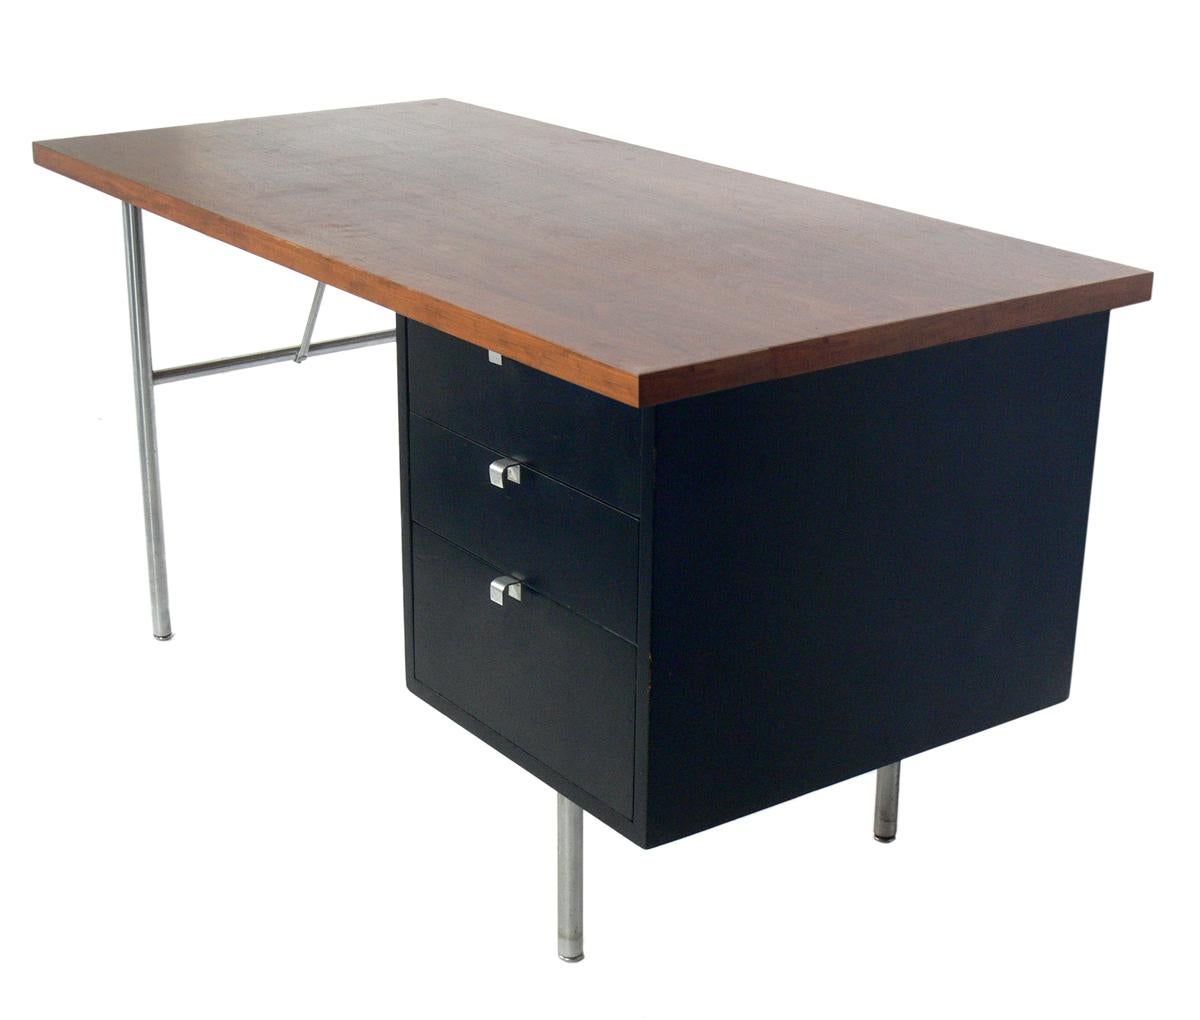 Clean Lined Desk, designed by George Nelson for Herman Miller, American, circa 1950s.